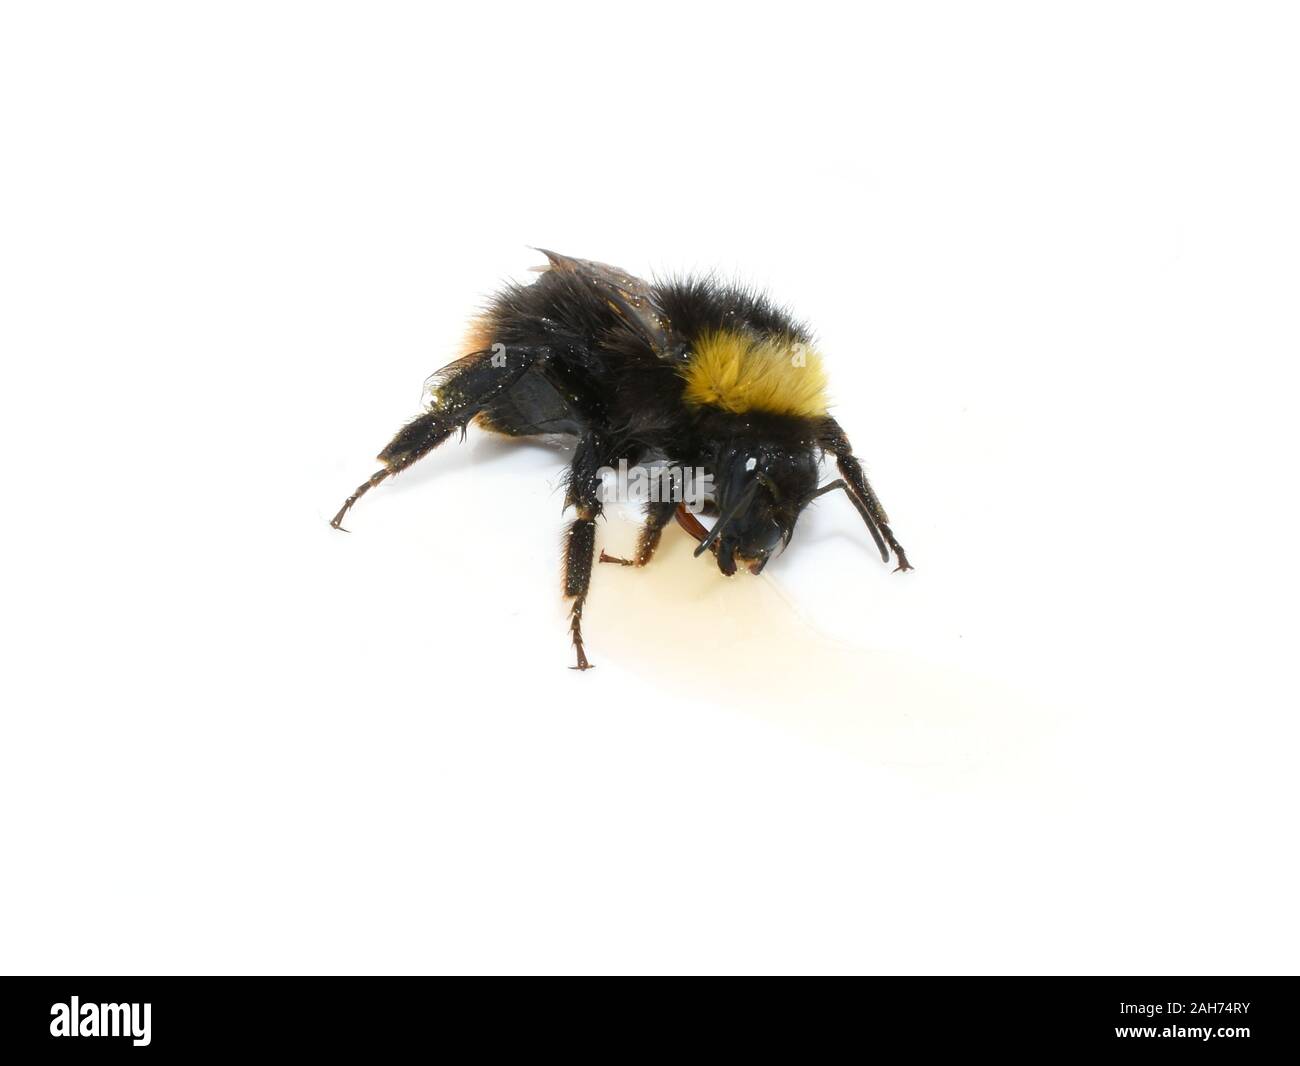 Bumblebee drinking sugar solution to recover from energy loss Stock Photo